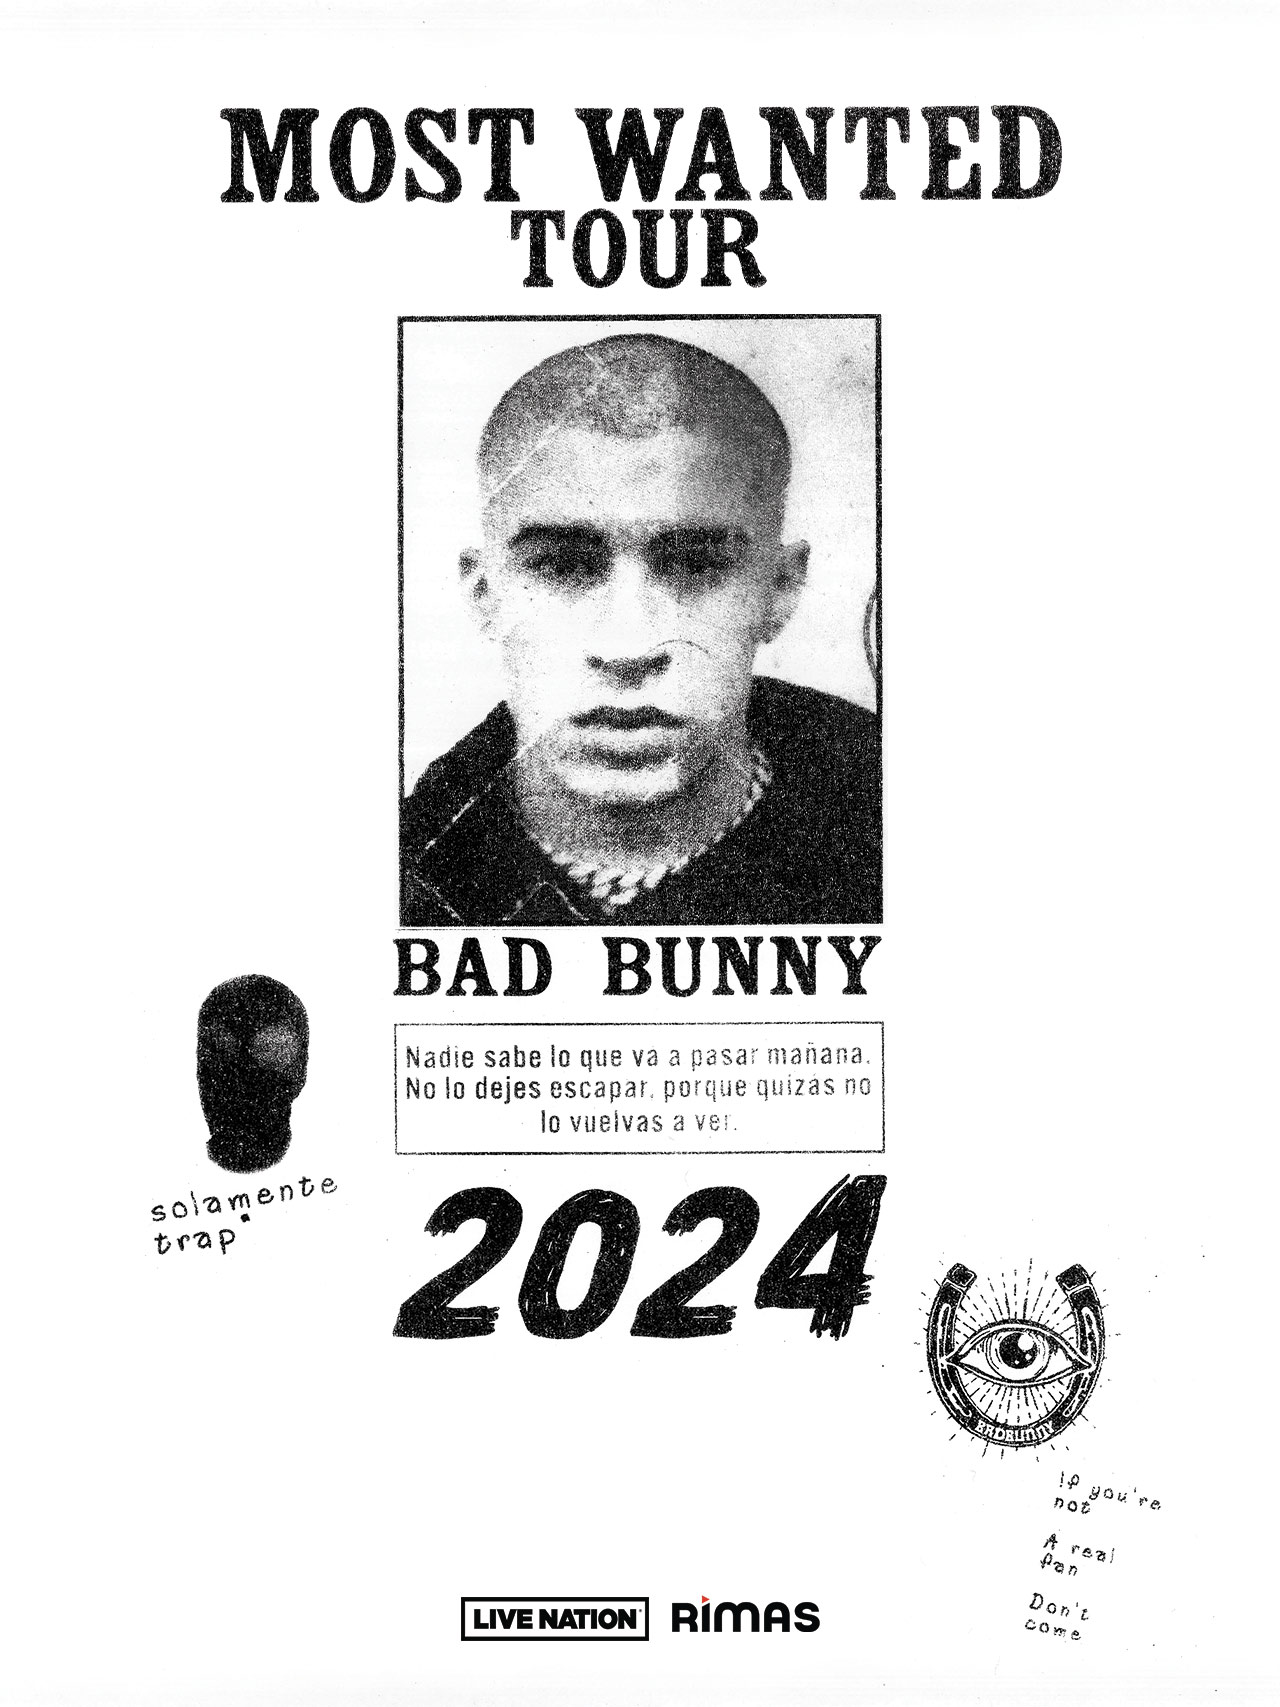 Bad Bunny class coming to SDSU in 2023